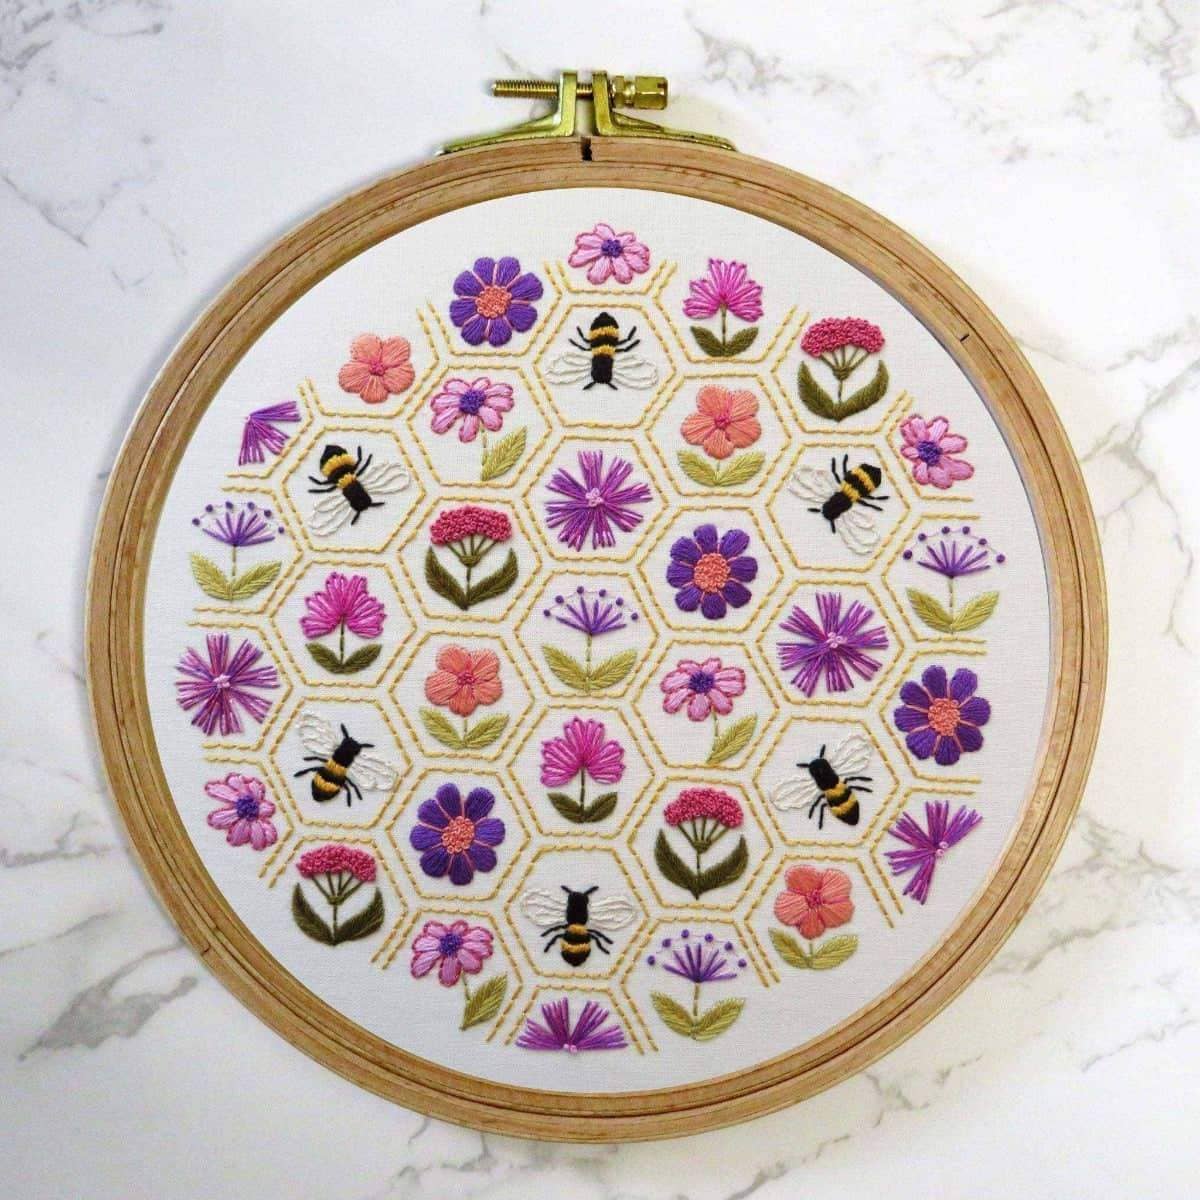 Flower Hive Hand Embroidery Kit , Embroidery Kit , StitchDoodles , beginner embroidery, embroidery hoop kit, embroidery kits for adults, embroidery kits for beginners, flower embroidery, hand embroidery, hand embroidery kit, modern embroidery kits, unique embroidery kits , StitchDoodles , shop.stitchdoodles.com